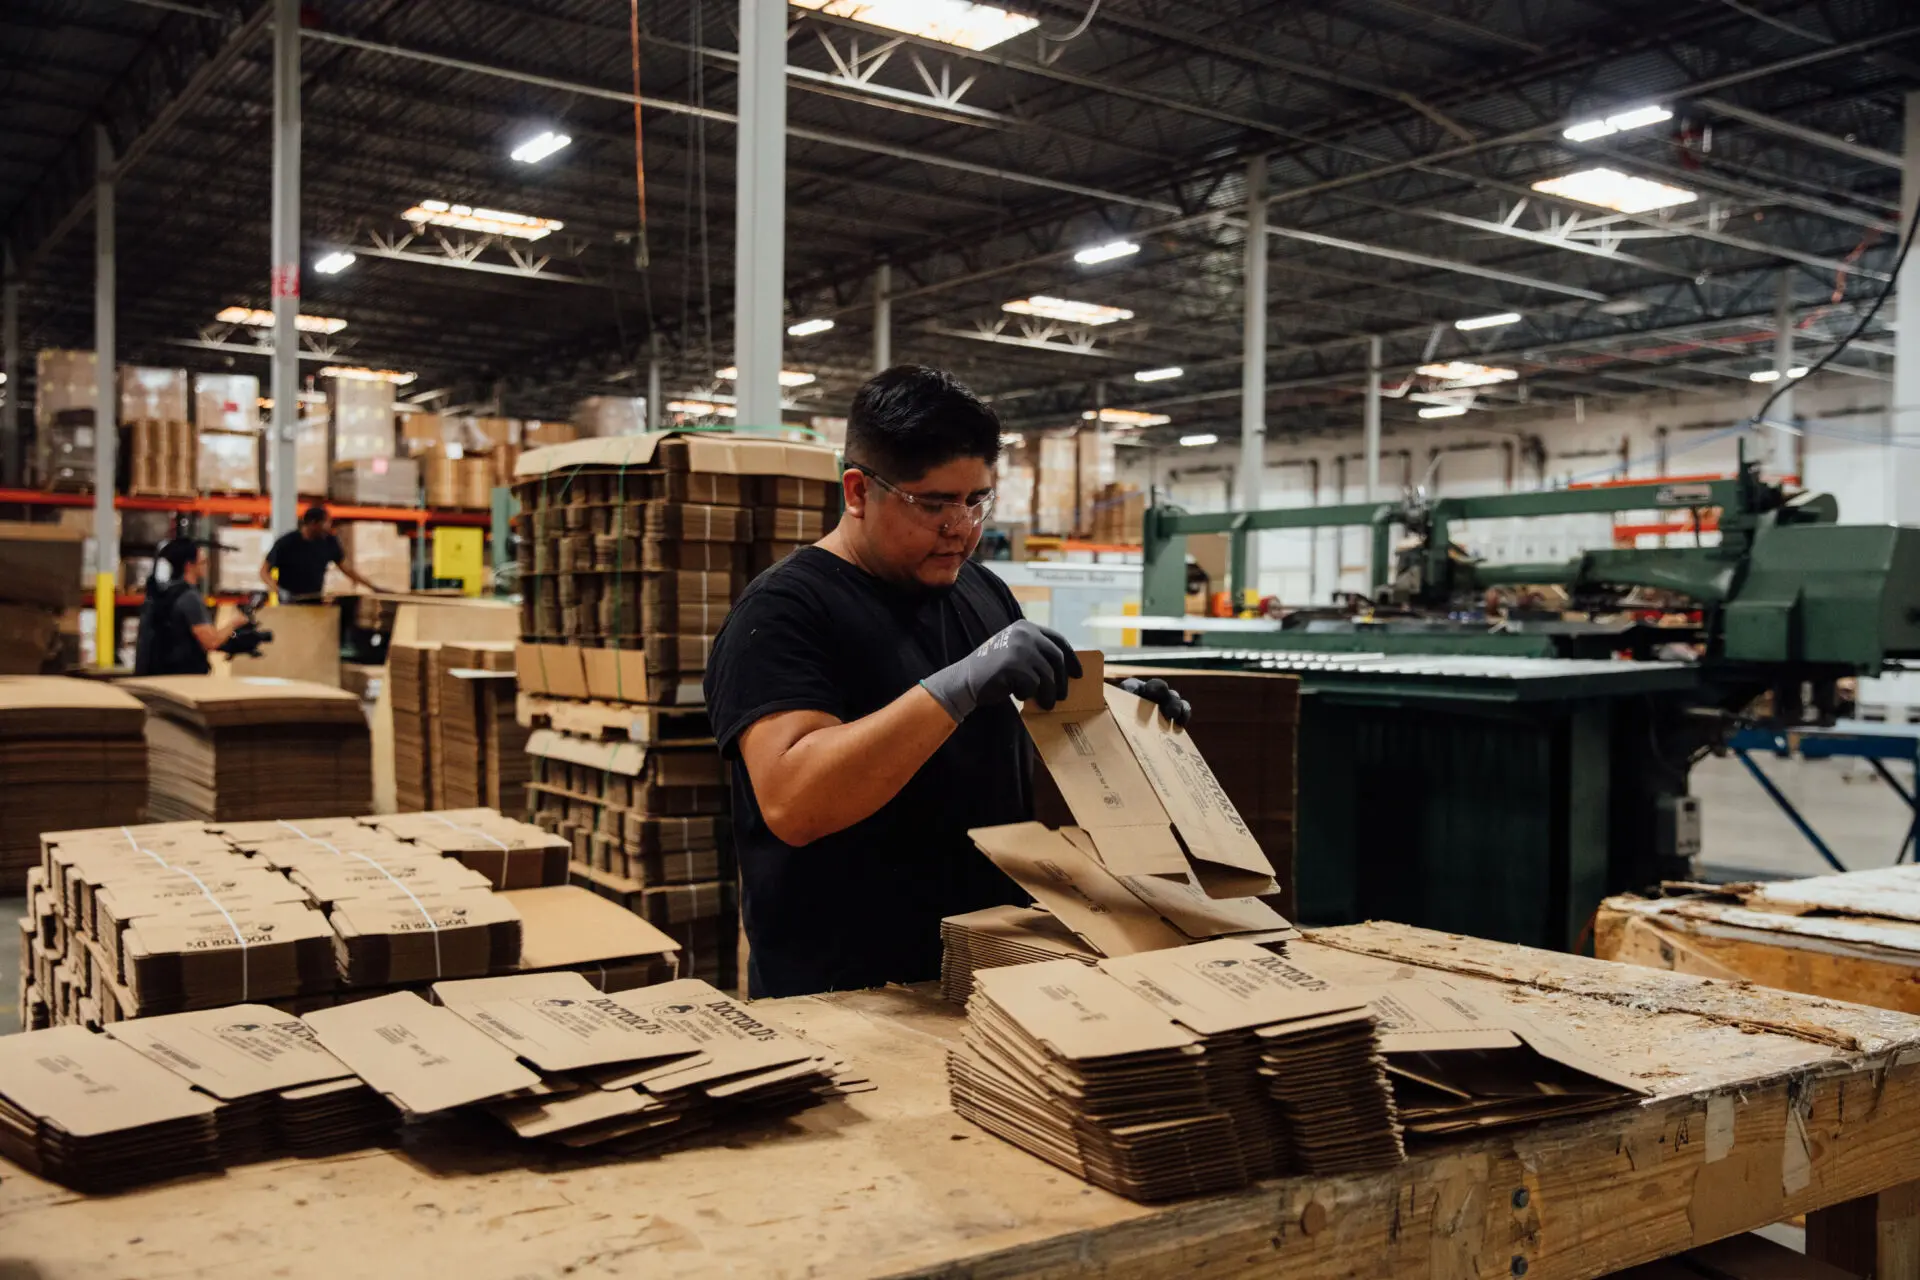 Worker assembles cardboard packaging in industrial packing facility